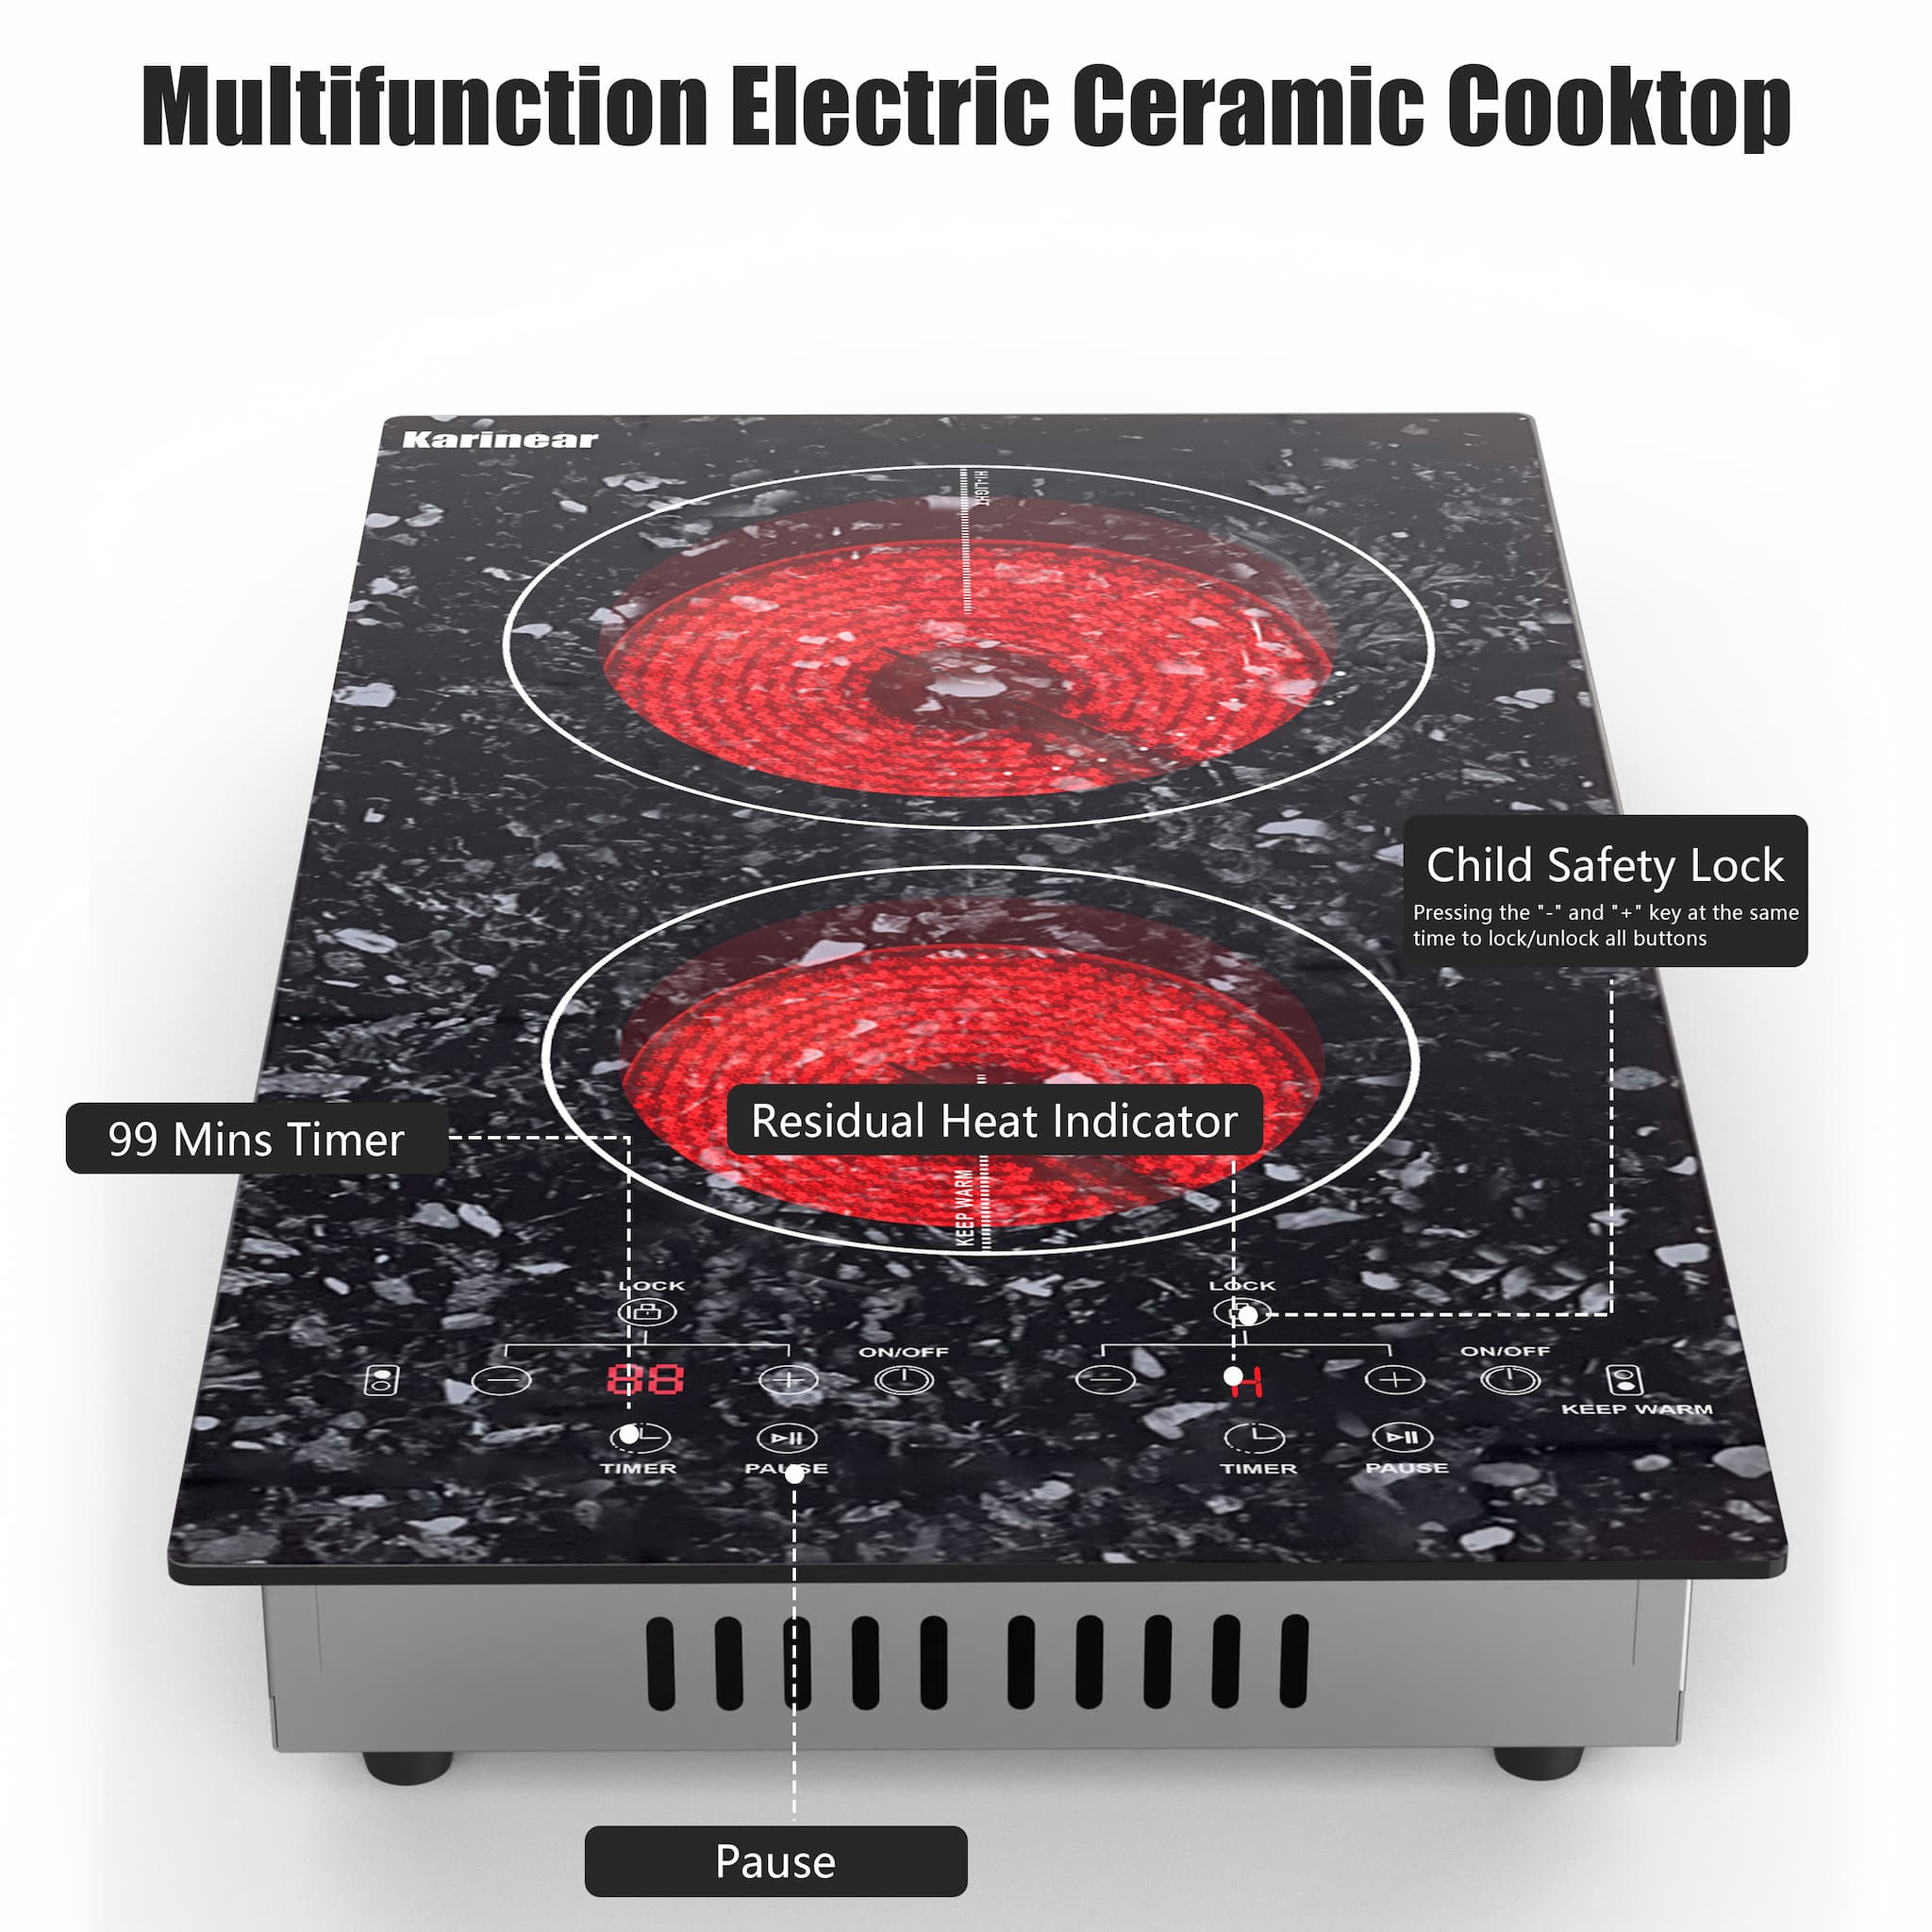 Multifunctional and Safer Cooktop